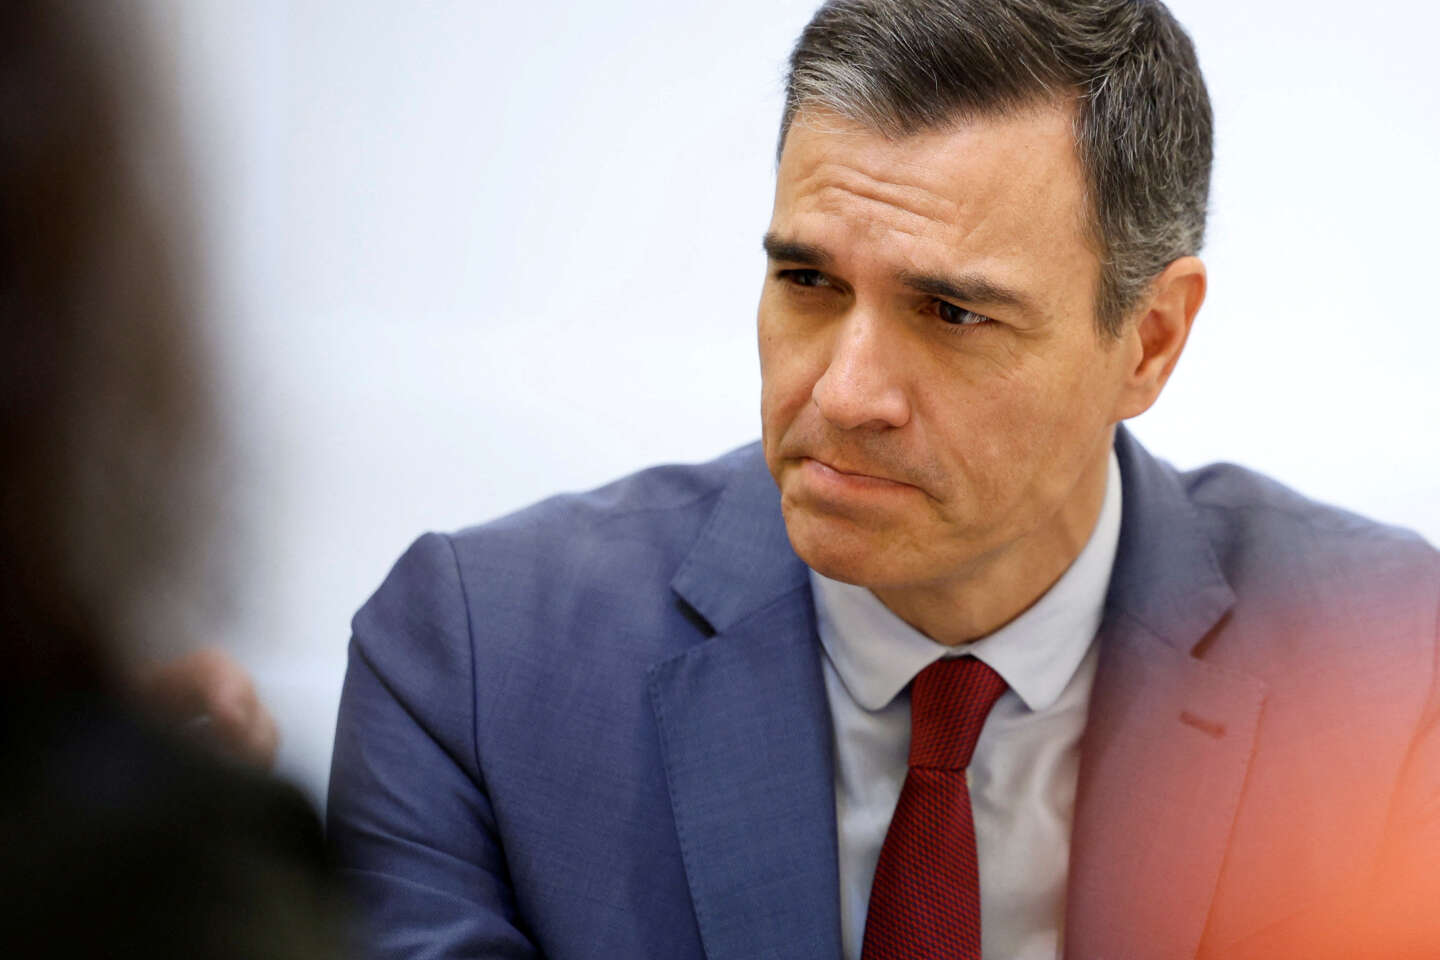 Spanish Prime Minister Pedro Sanchez says he is considering resigning following the opening of a corruption investigation against his wife